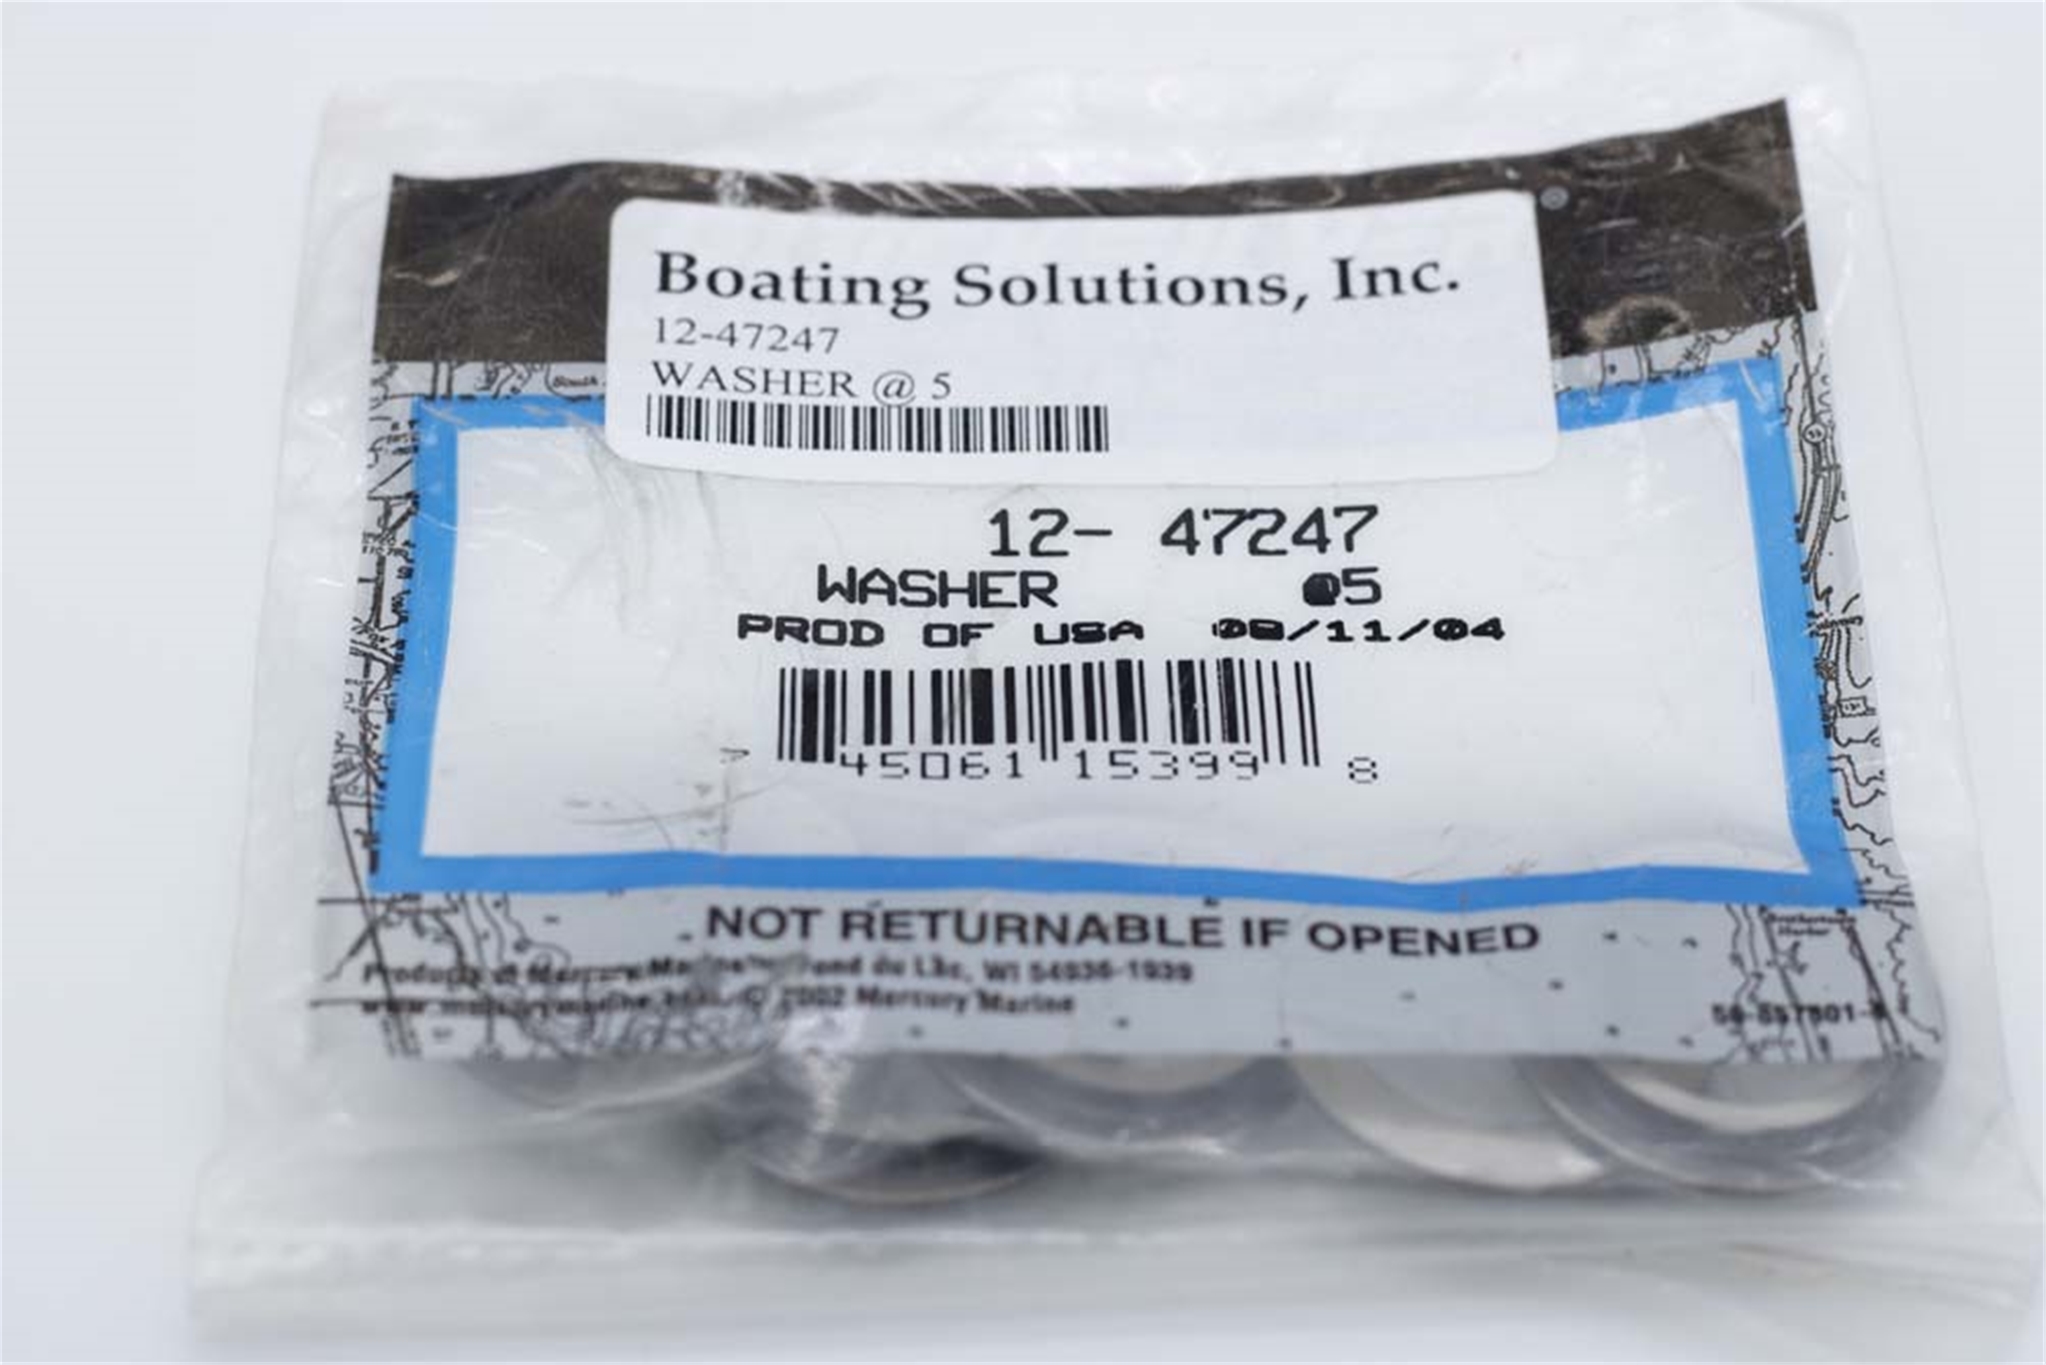 12-47247 Washer Ss